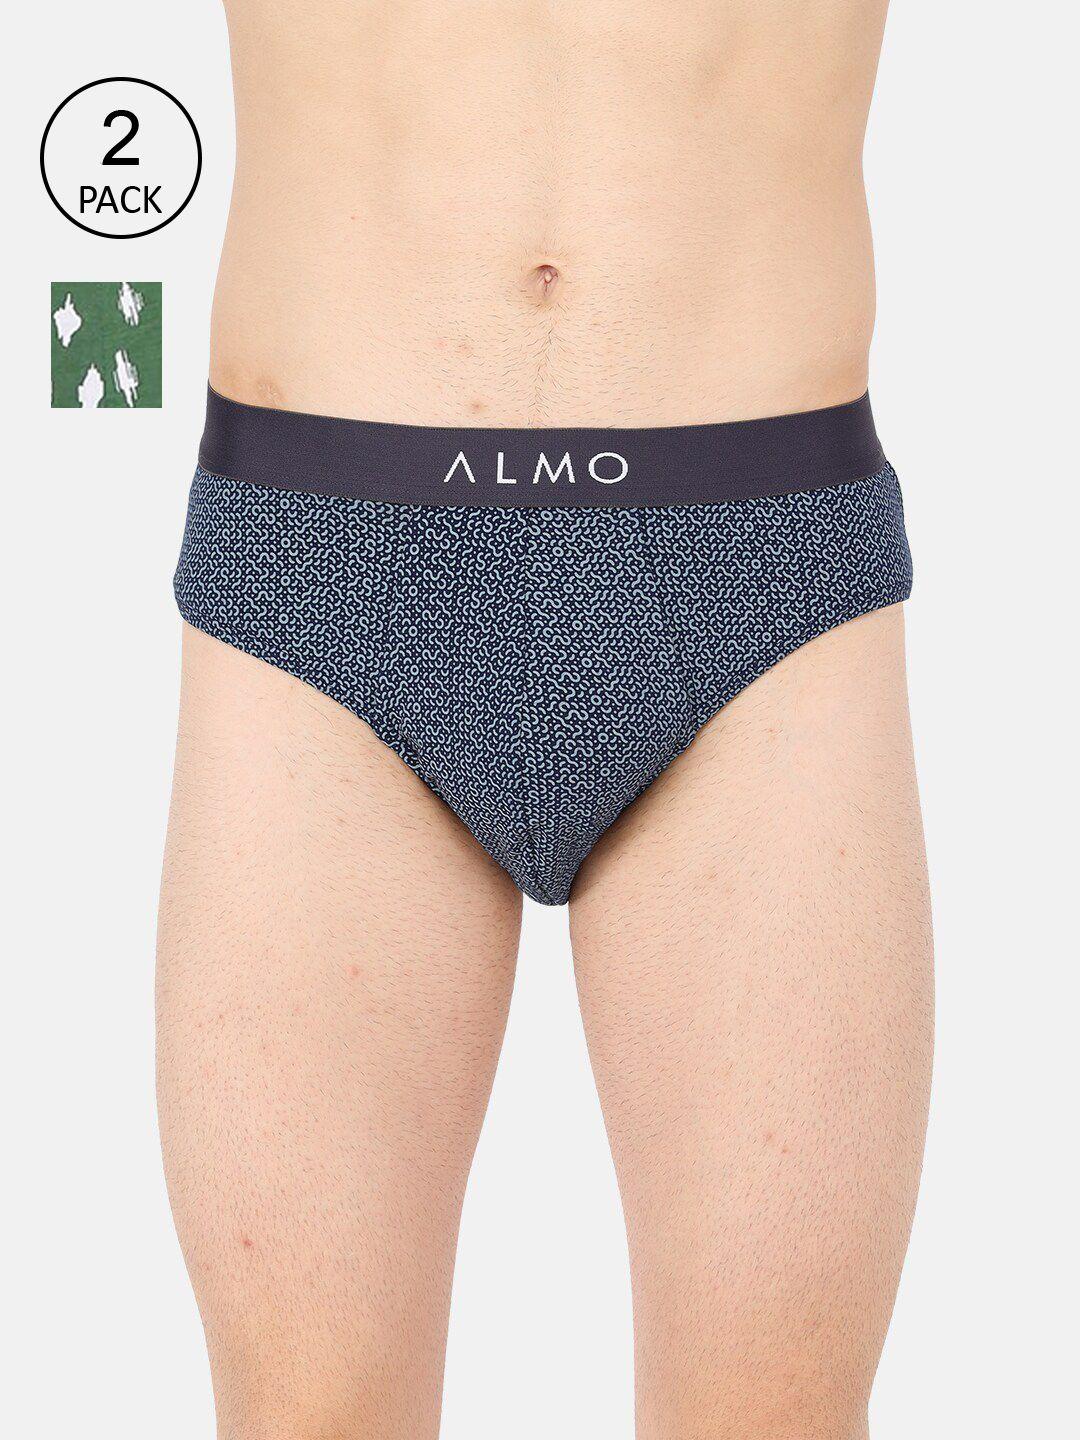 almo-wear-men-pack-of-2-navy-blue-printed-organic-cotton-basic-briefs